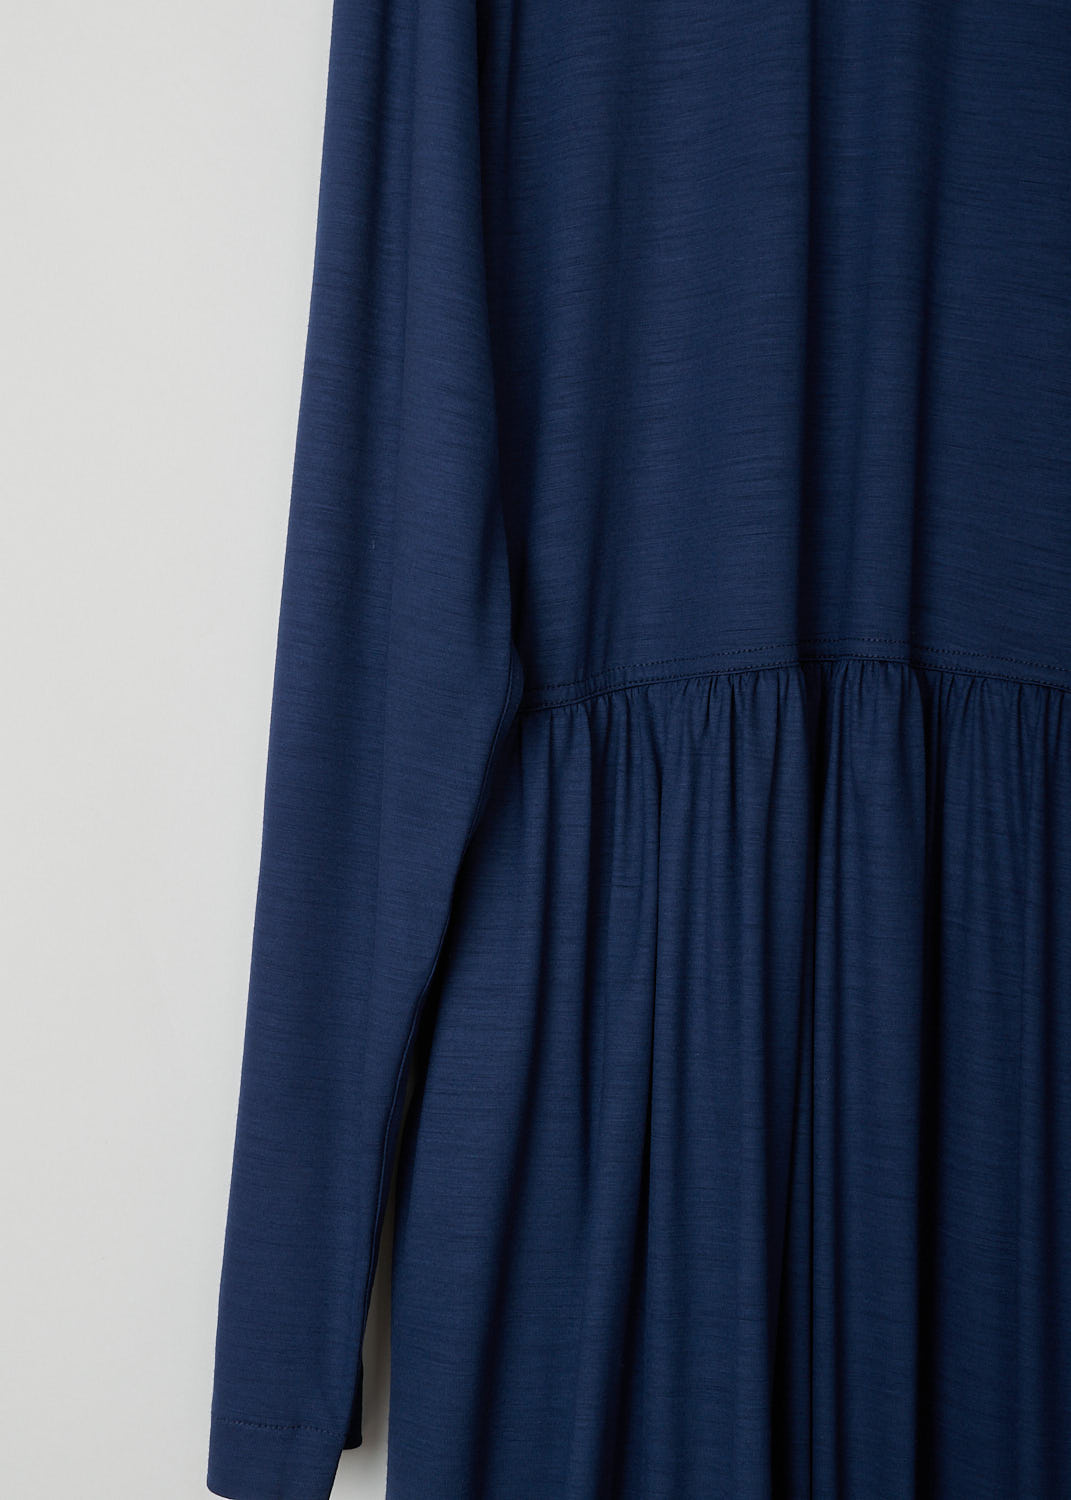 SOFIE Dâ€™HOORE, NAVY BLUE LONG SLEEVE DRESS, DEMURE_WOJE_NAVY, Blue, Detail, This navy blue mid-length dress features a round neckline, a plain long sleeve bodice and a twisted balloon skirt. A single side pocket can be found concealed in the seam. 
